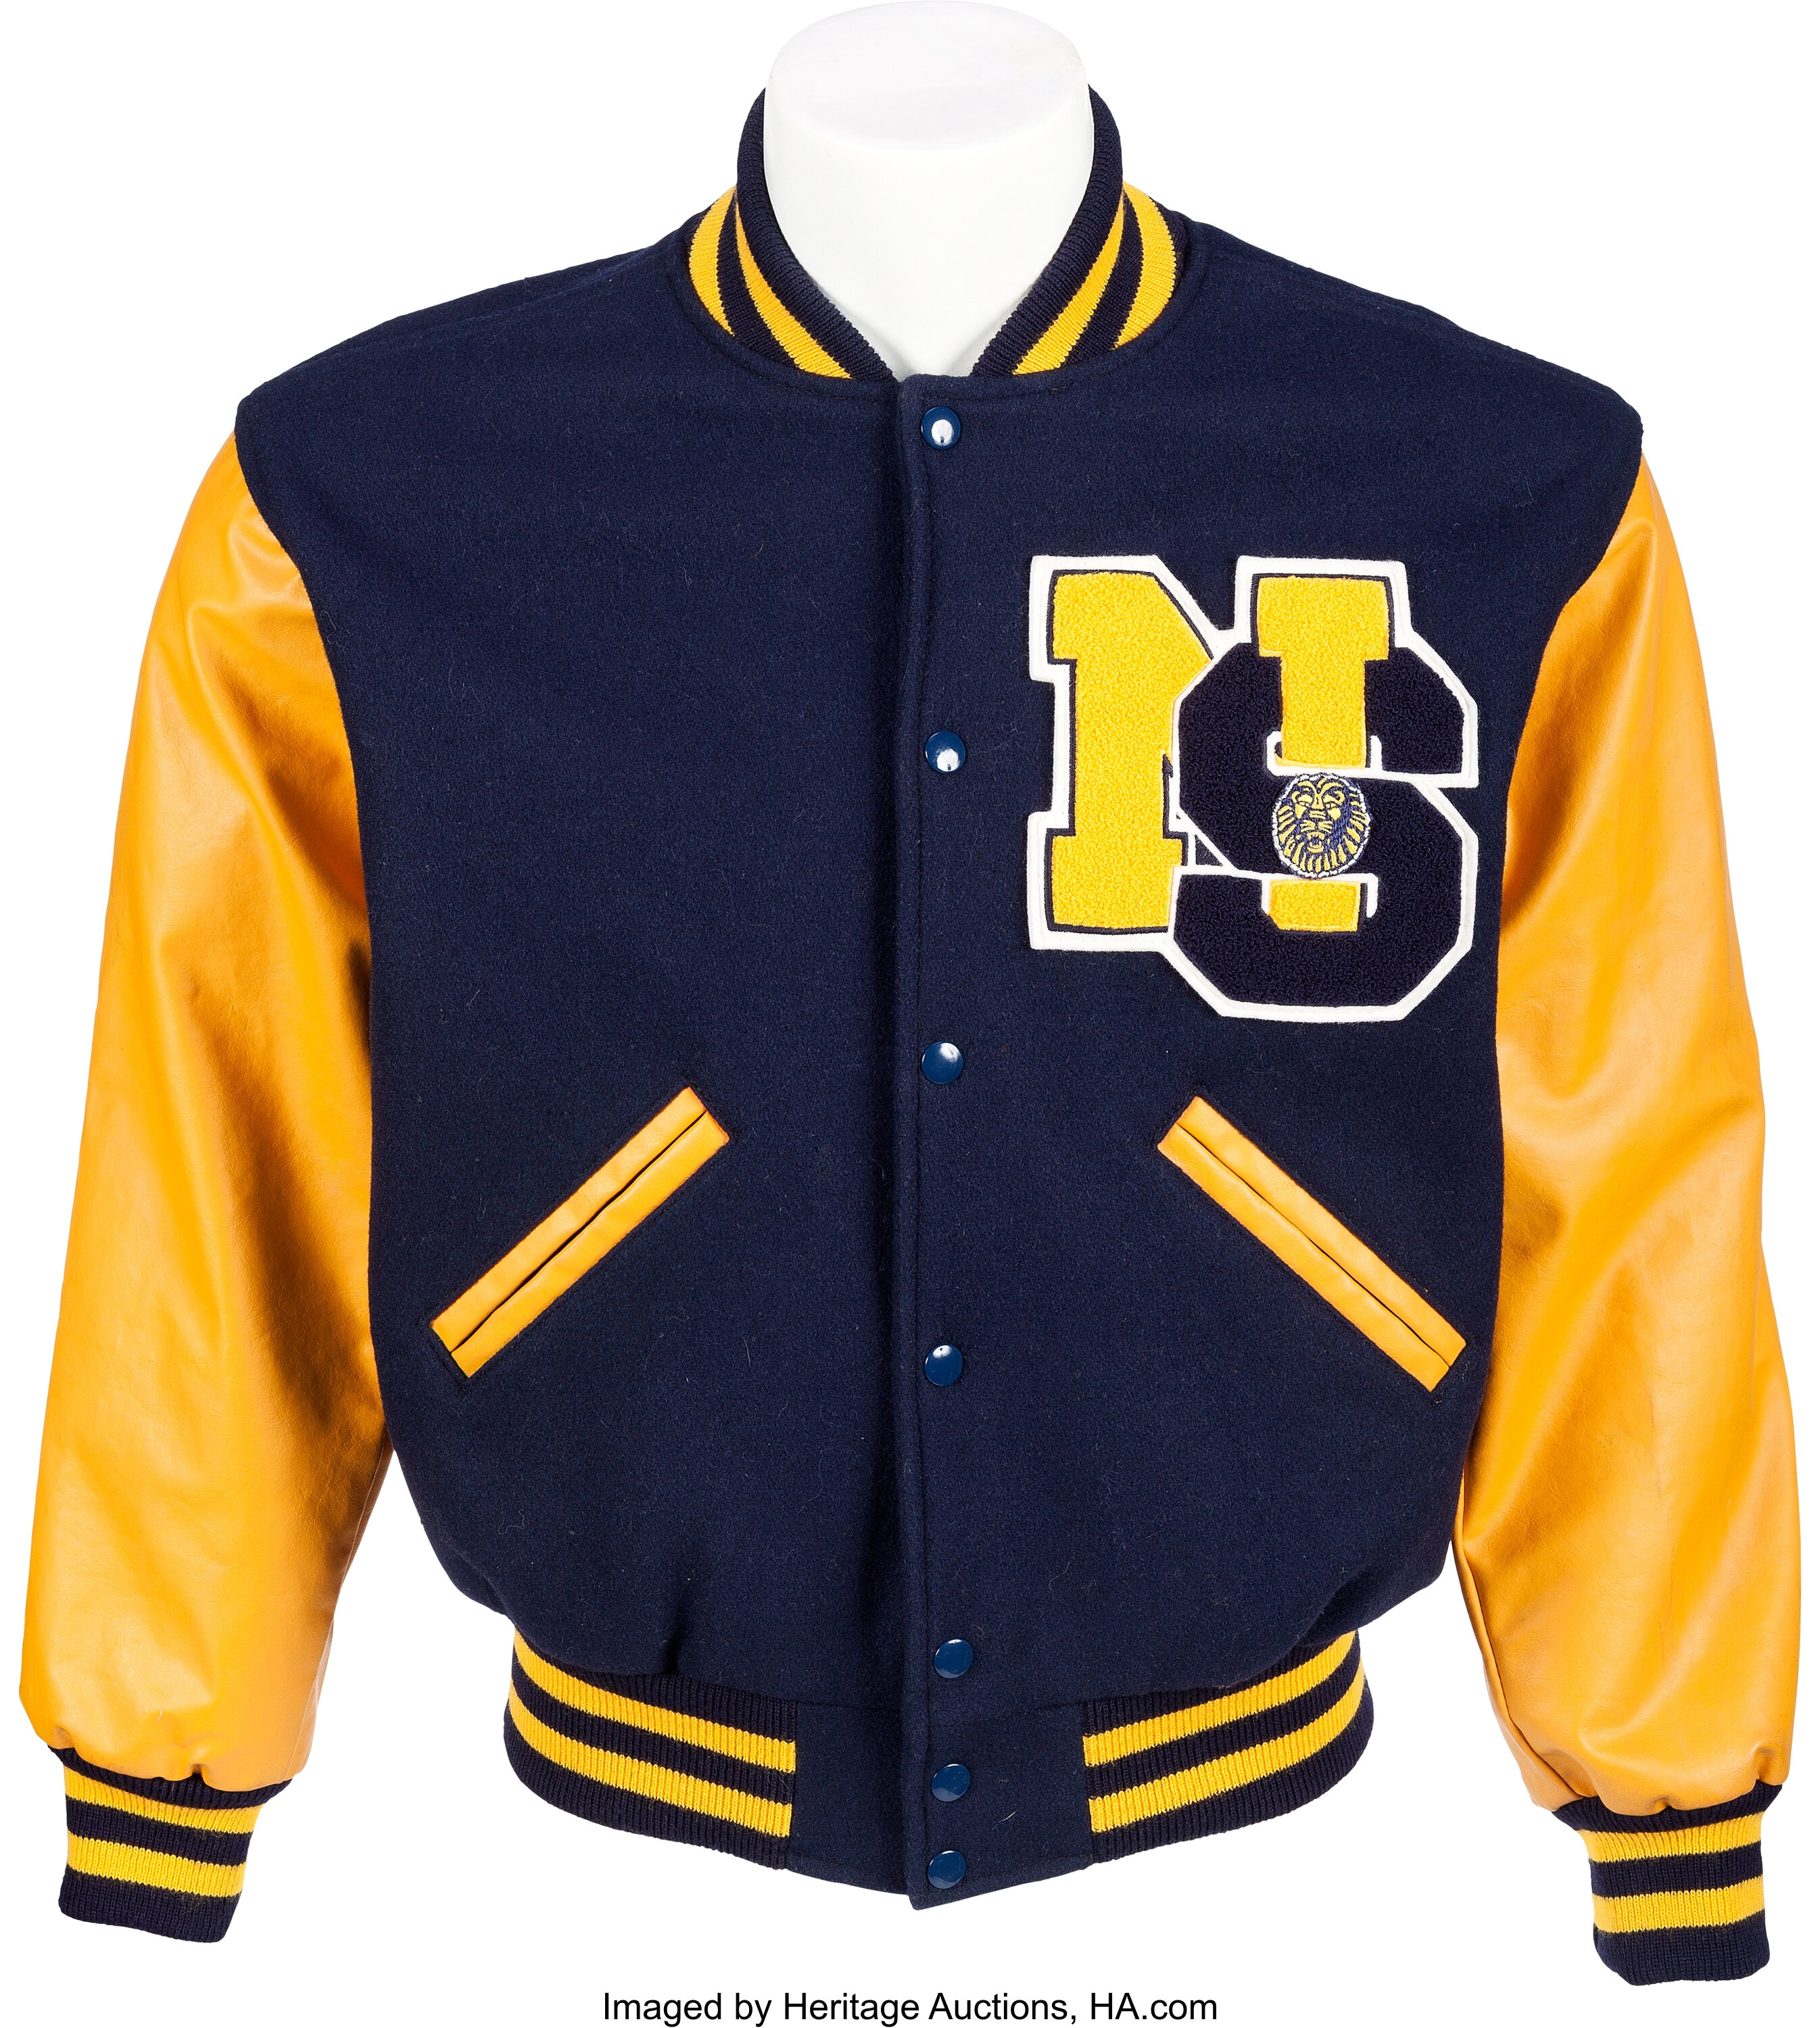 A Lindsay Lohan Letterman Jacket from 